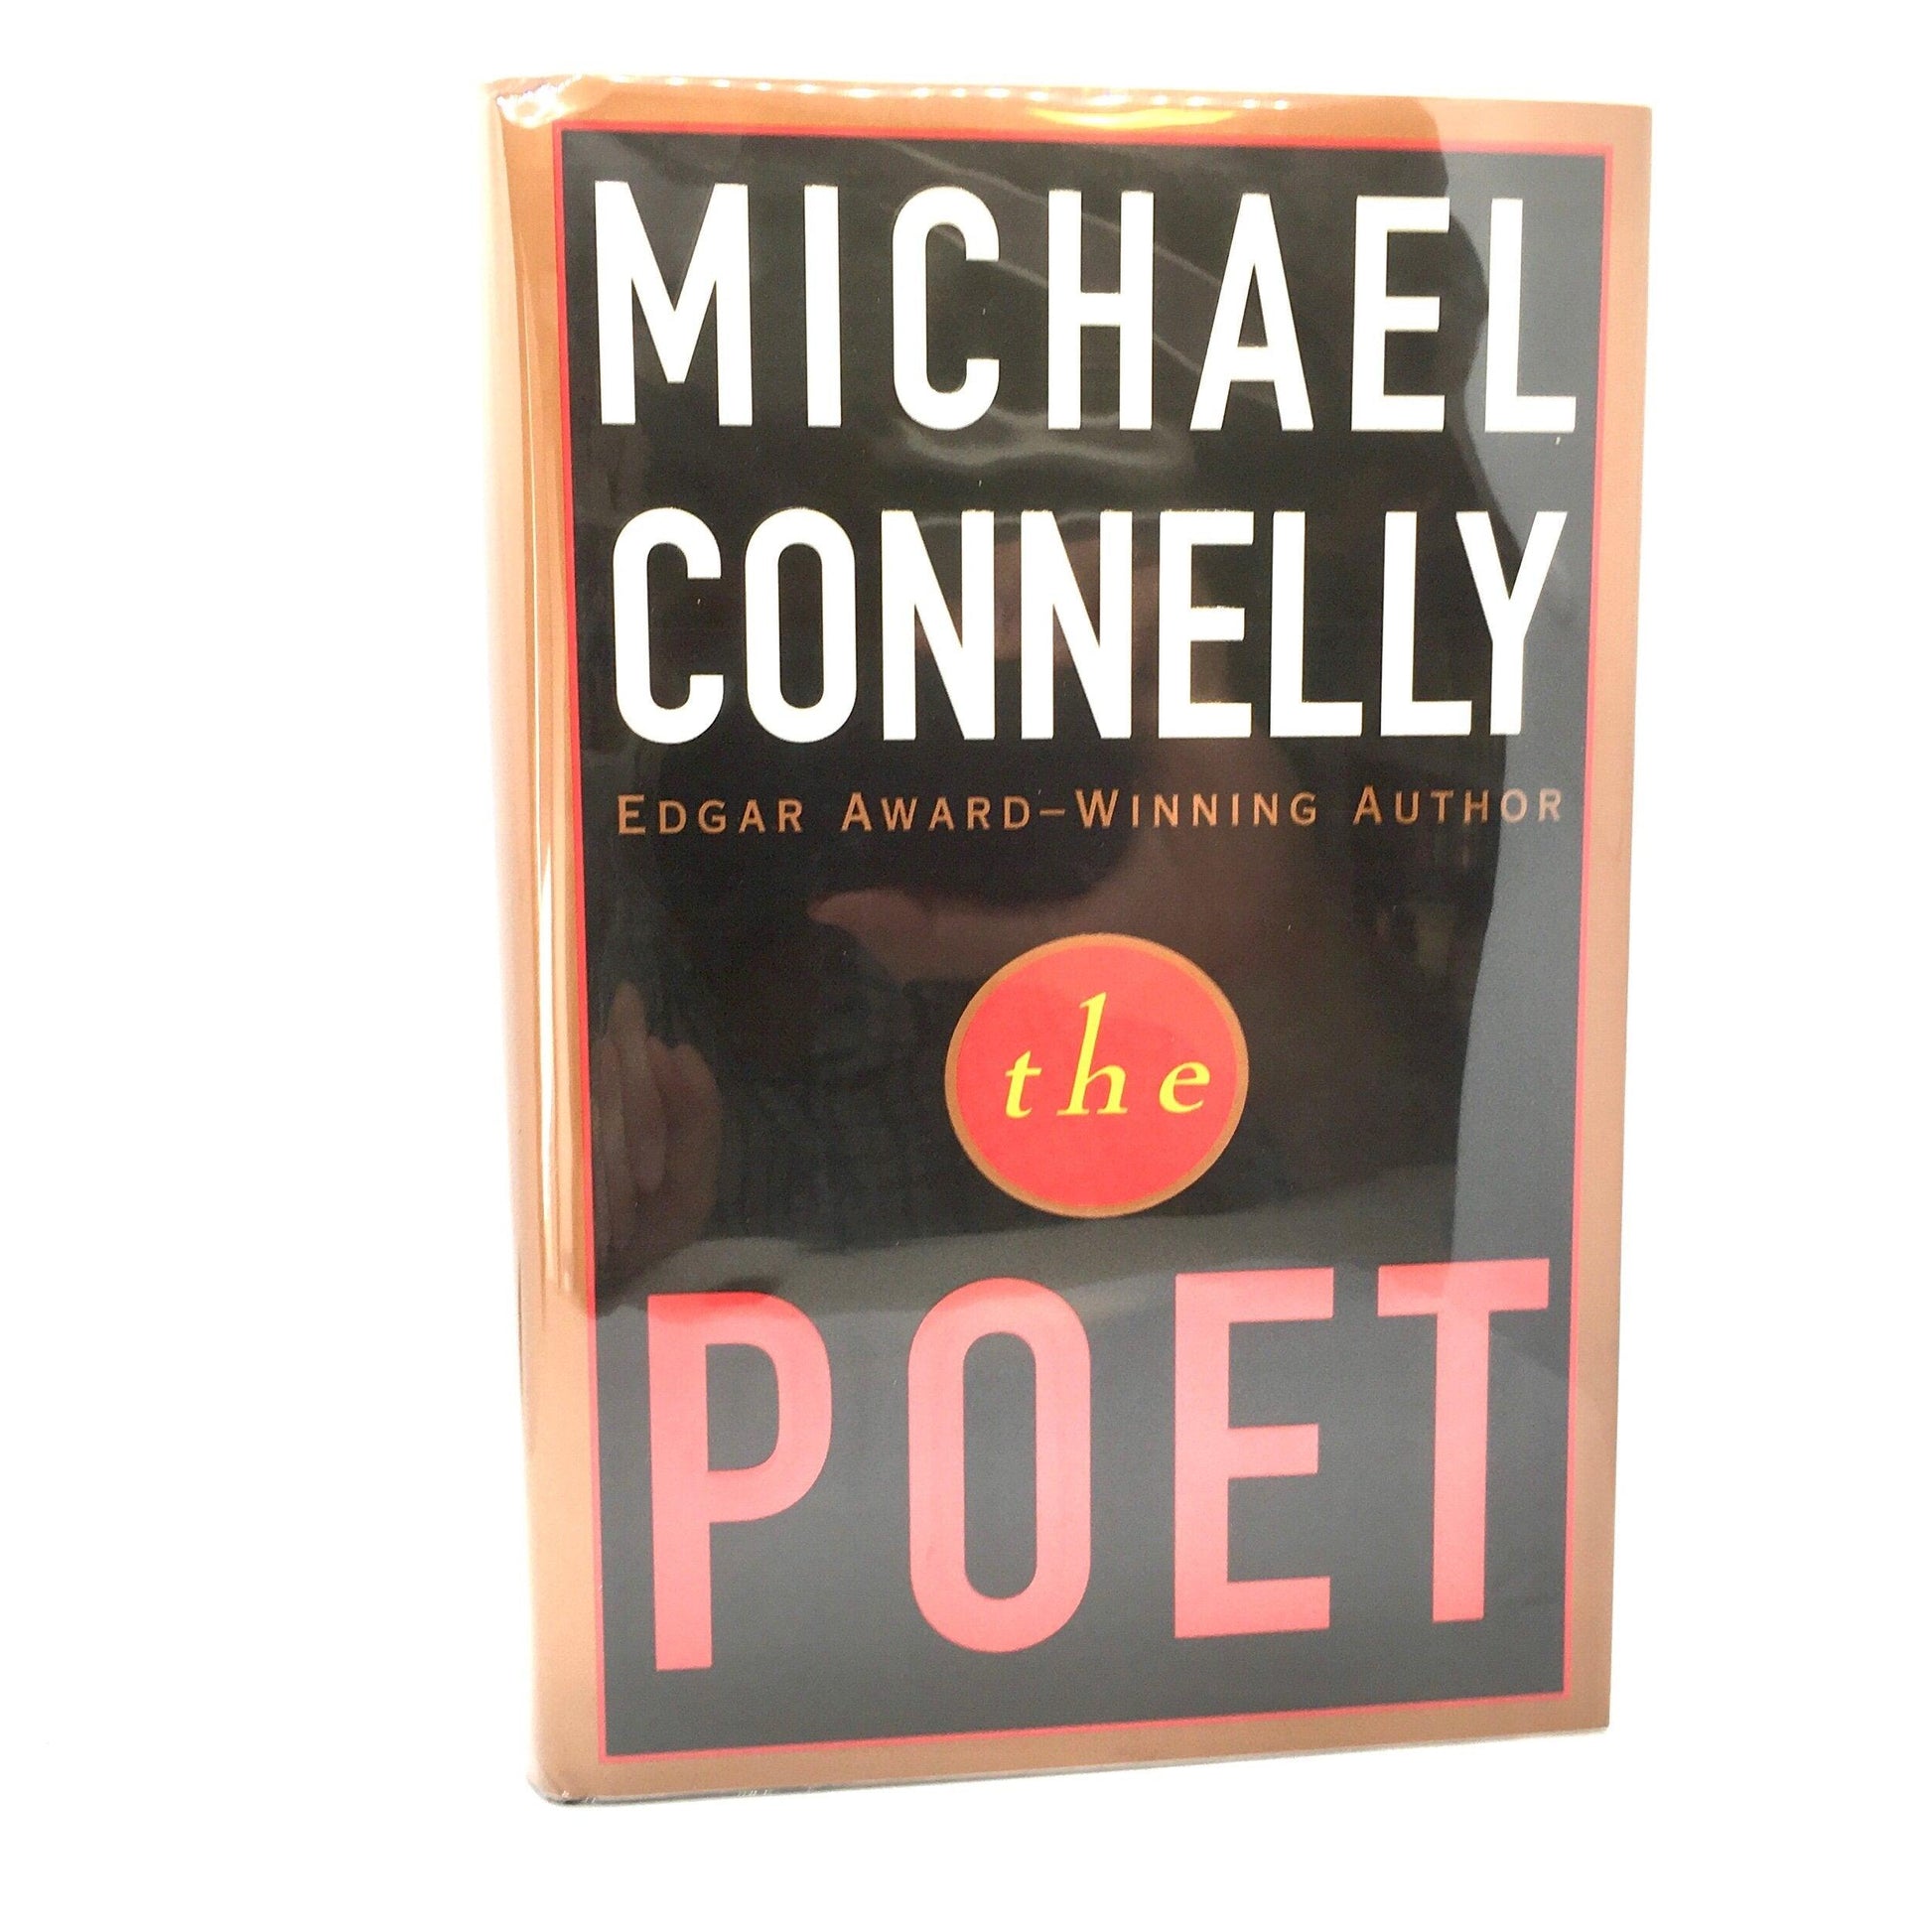 CONNELLY, Michael "The Poet" [Little, Brown & Co, 1996] 1st Edition (Signed) - Buzz Bookstore